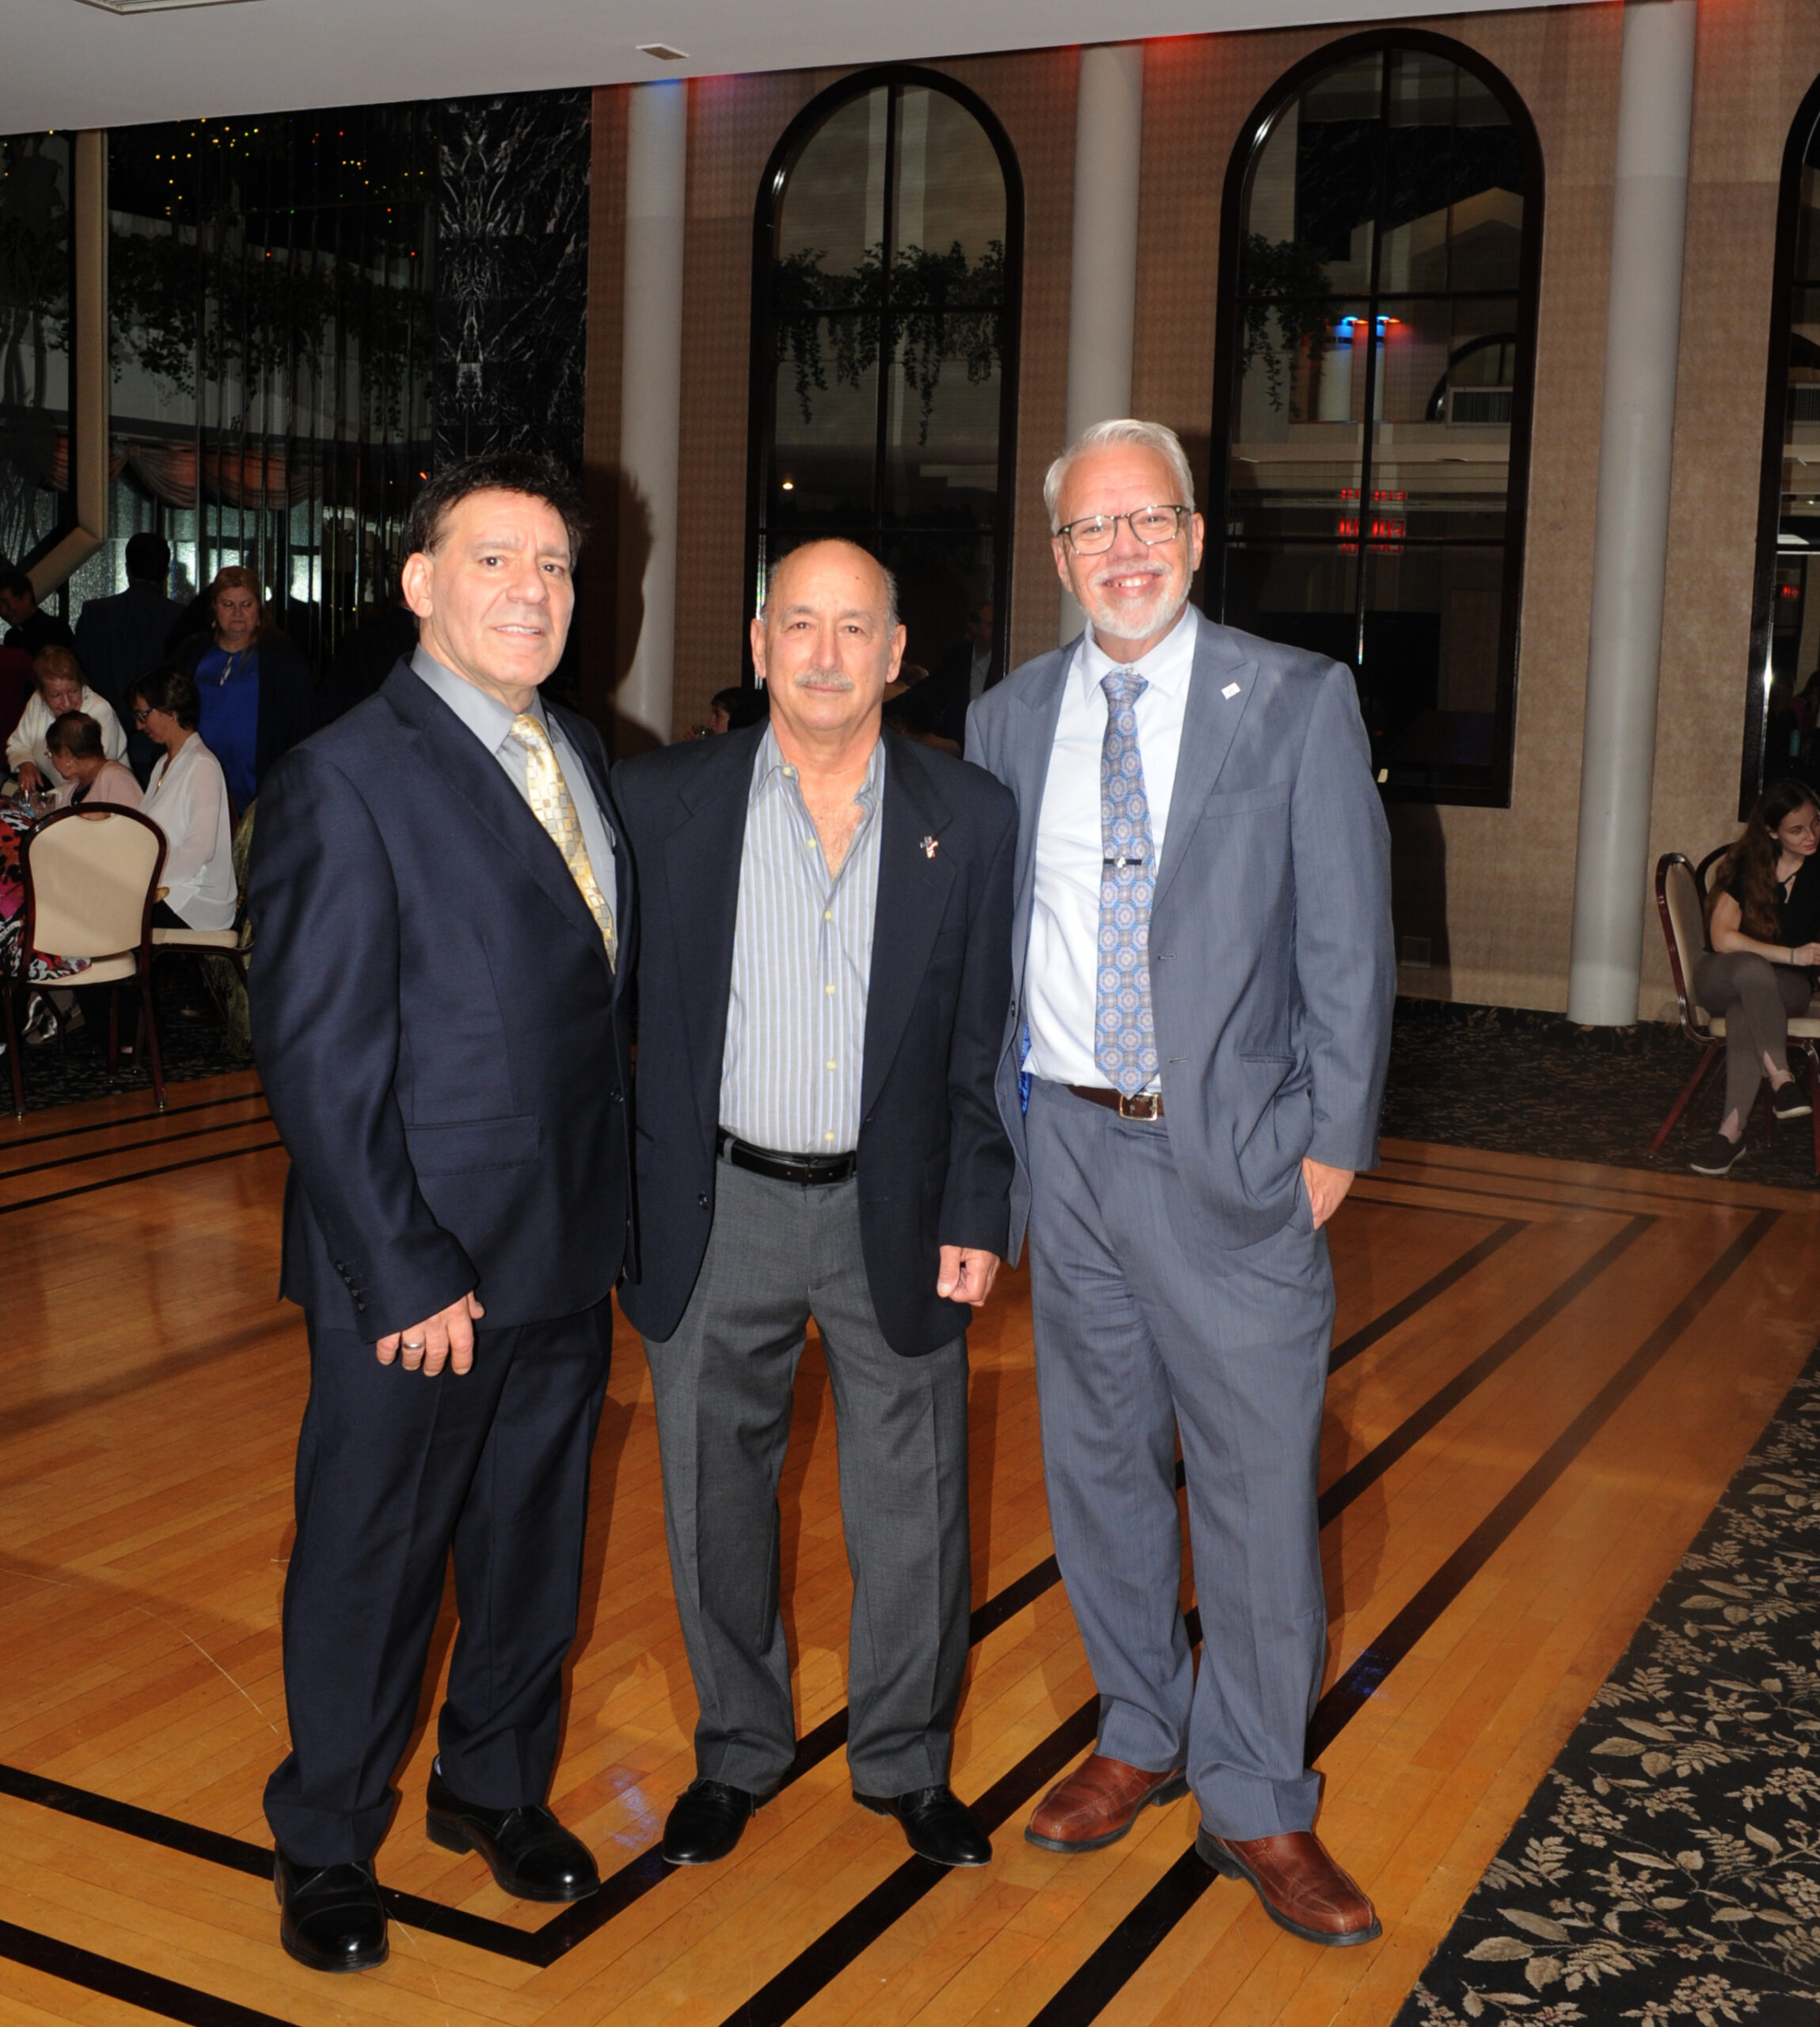 Photo from Dyker Heights Civic Association dinner